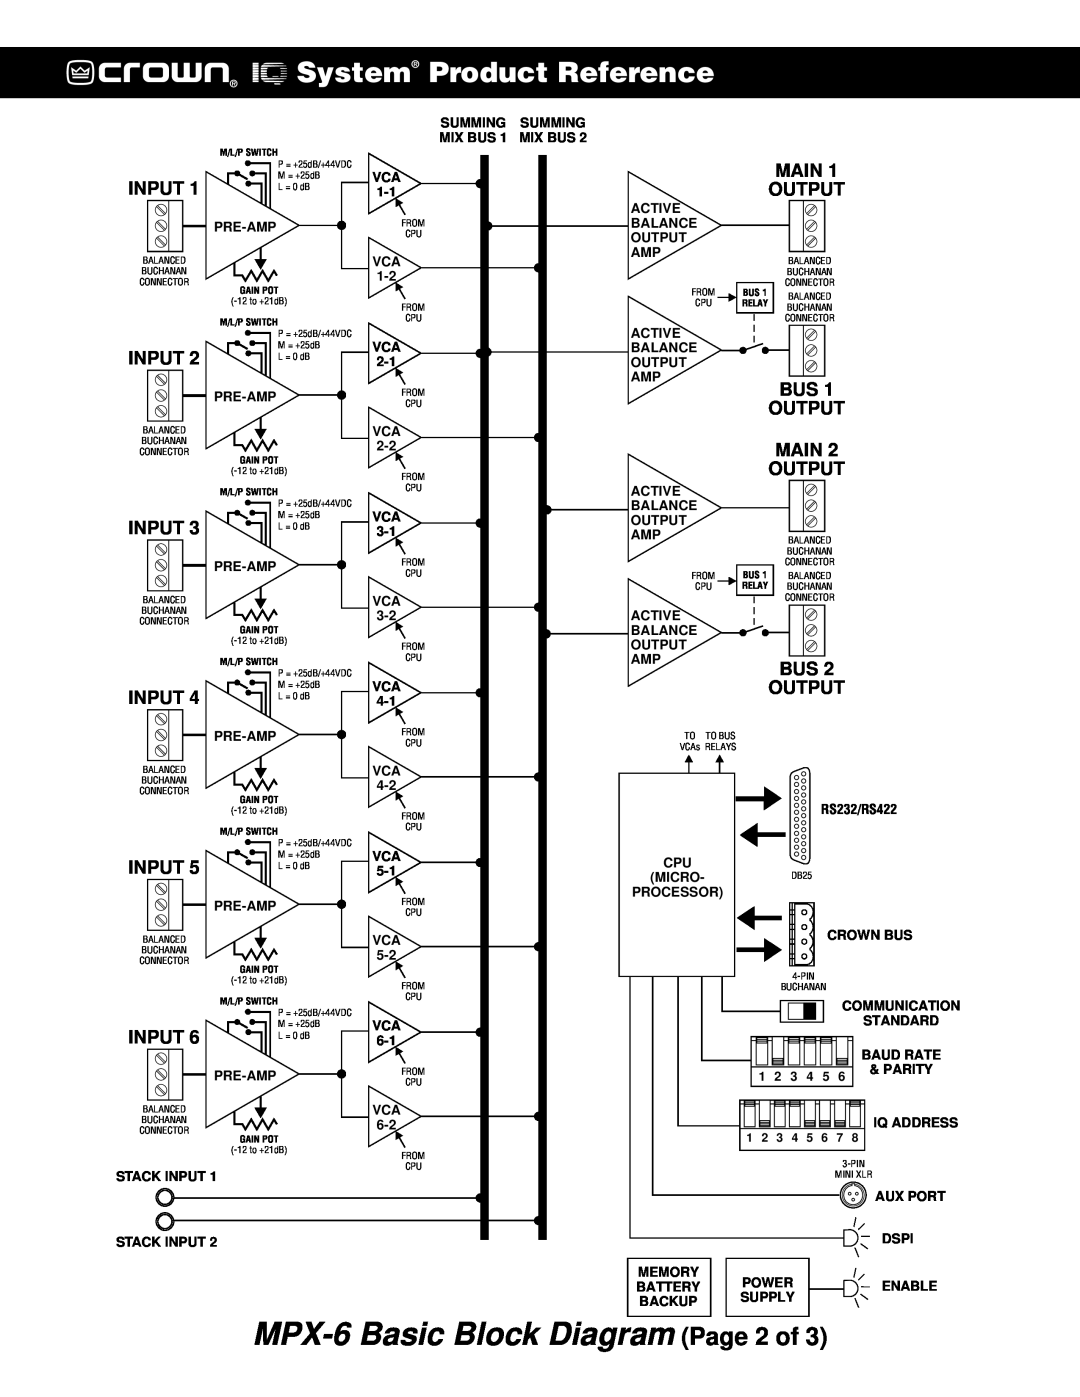 Crown MPX-6TM manual MPX-6 Basic Block Diagram, @crown * System Product Reference, Input, Bus Output Main Output 